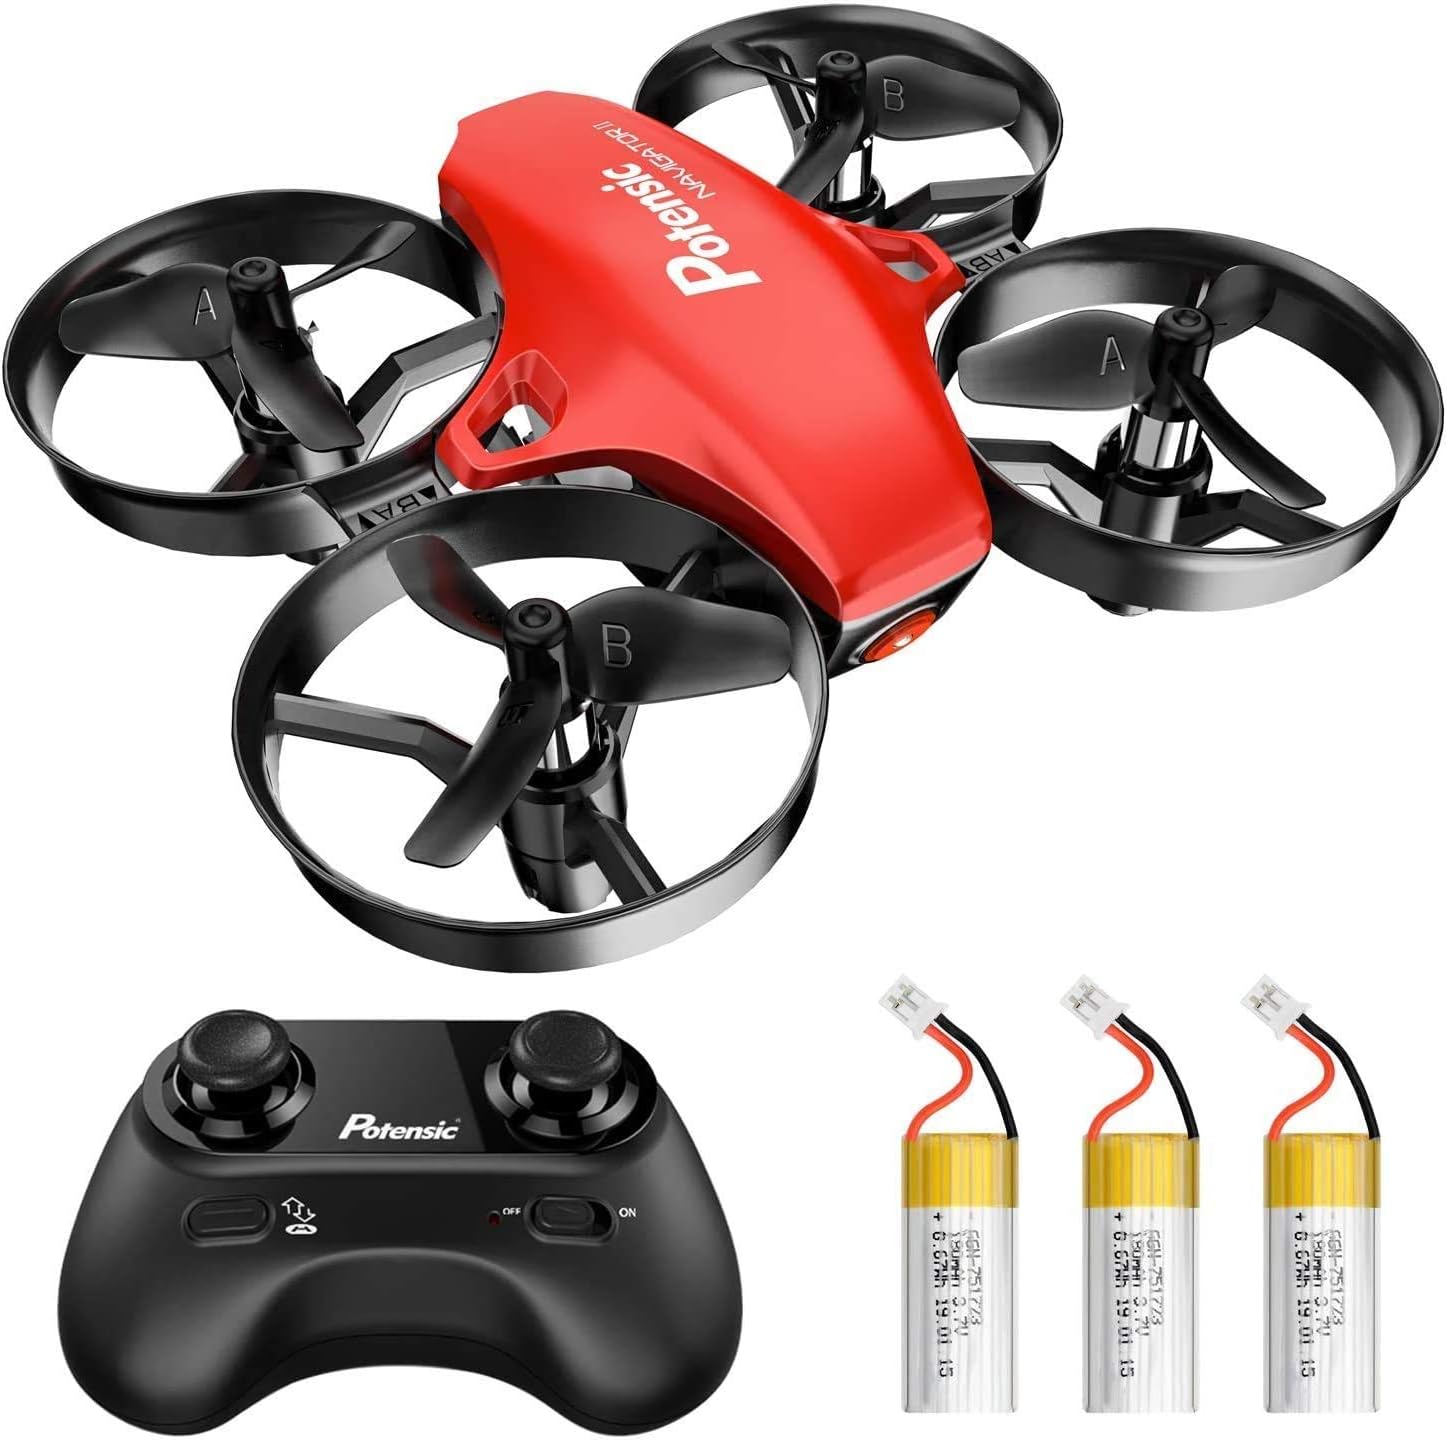 Potensic Mini Drone for Children and Beginners with 3 Batteries, RC Quadcopter, Mini Drone with Altitude Hold Mode, One Button Start / Landing,…